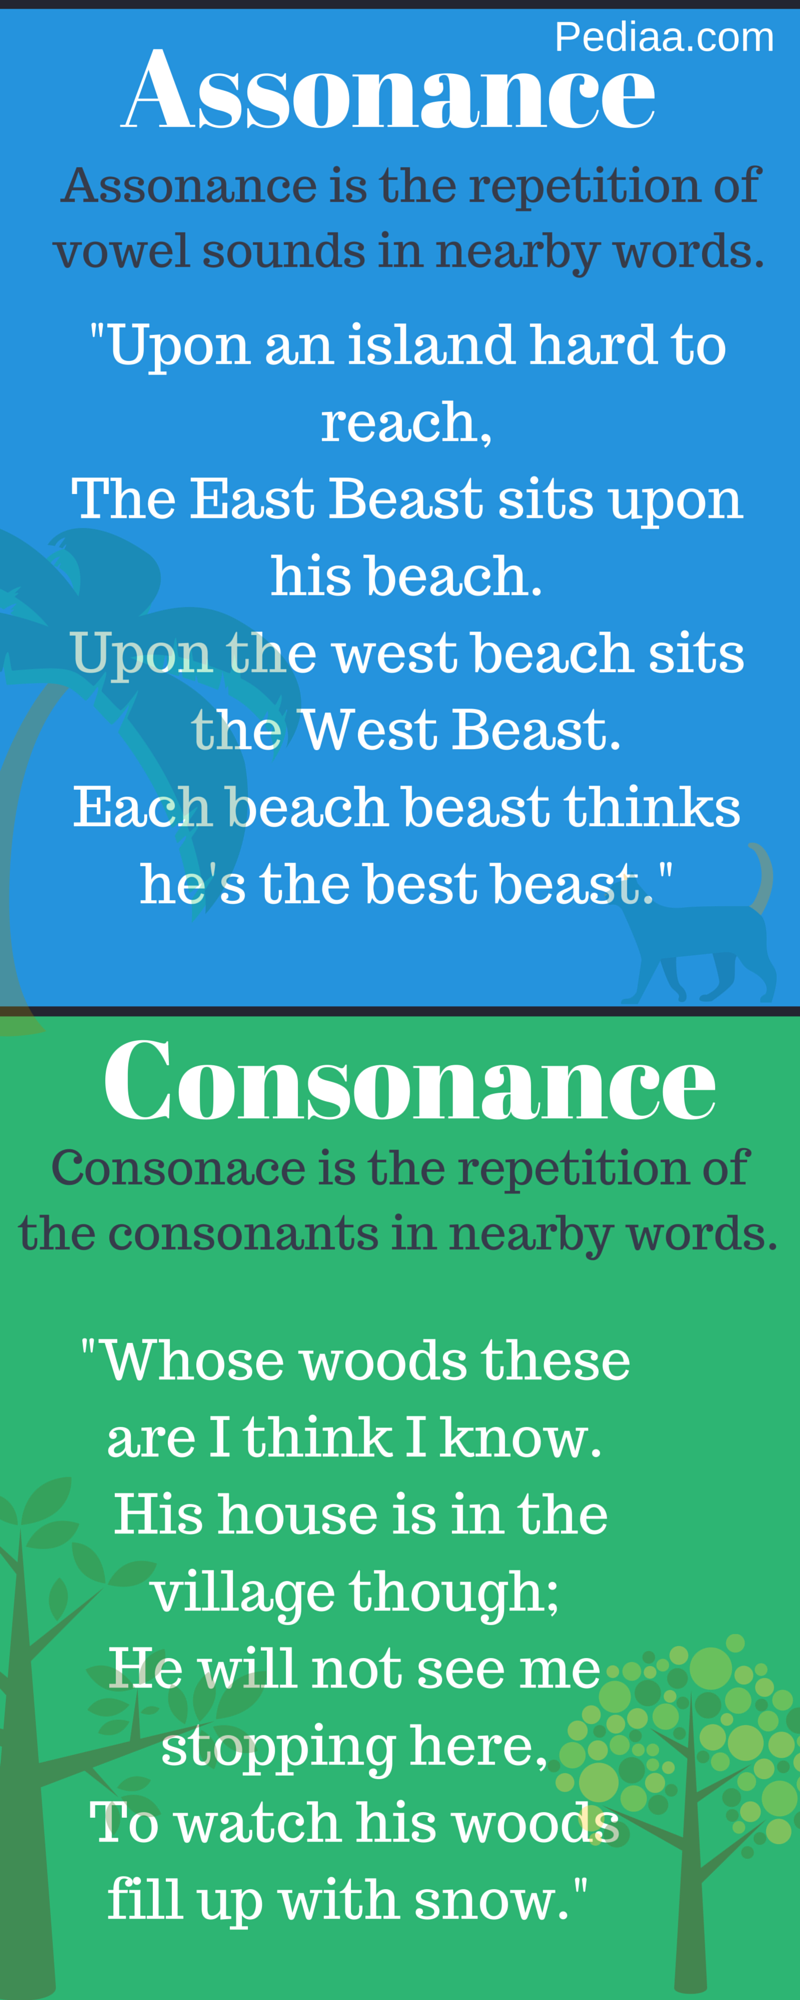 Difference Between Assonance and Consonance